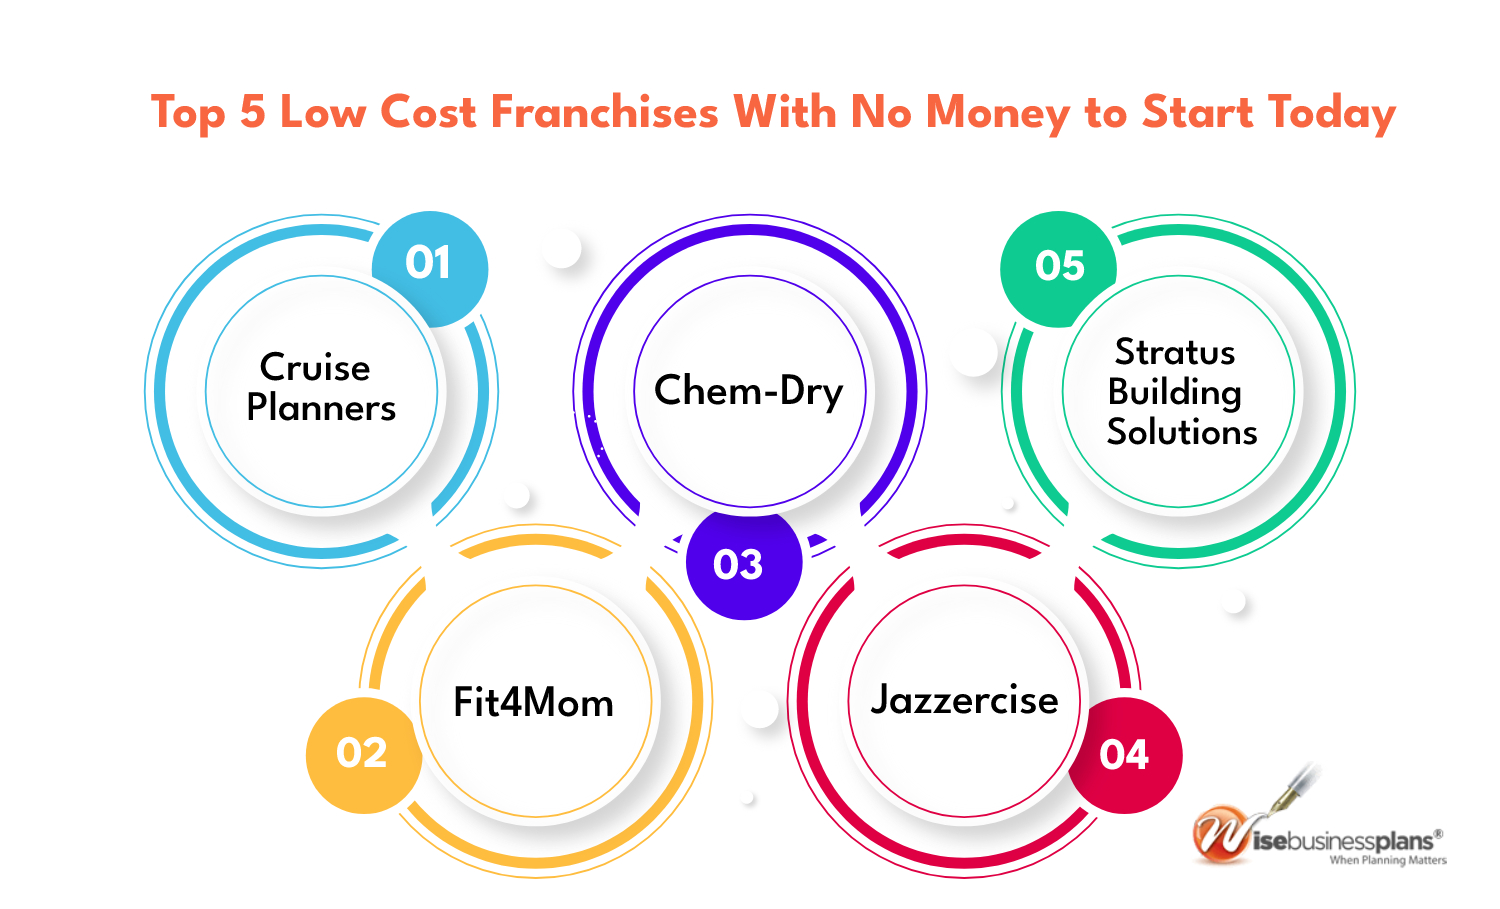 Top low cost franchises with no money to start